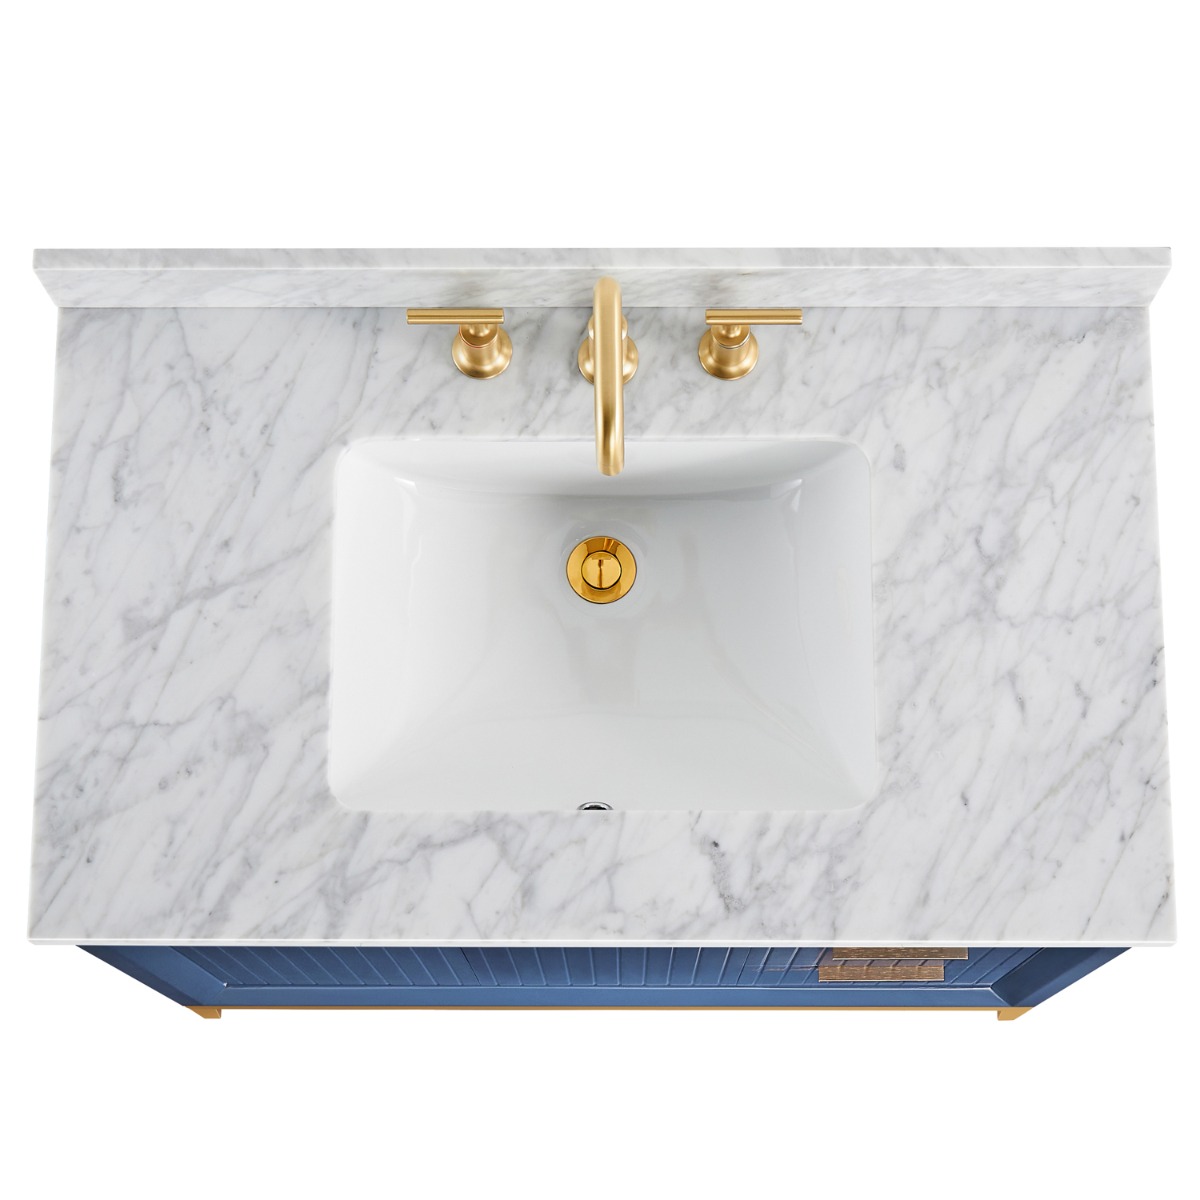 Bungalow Navy and Gold 36" Single Vanity with Carrara Marble Top